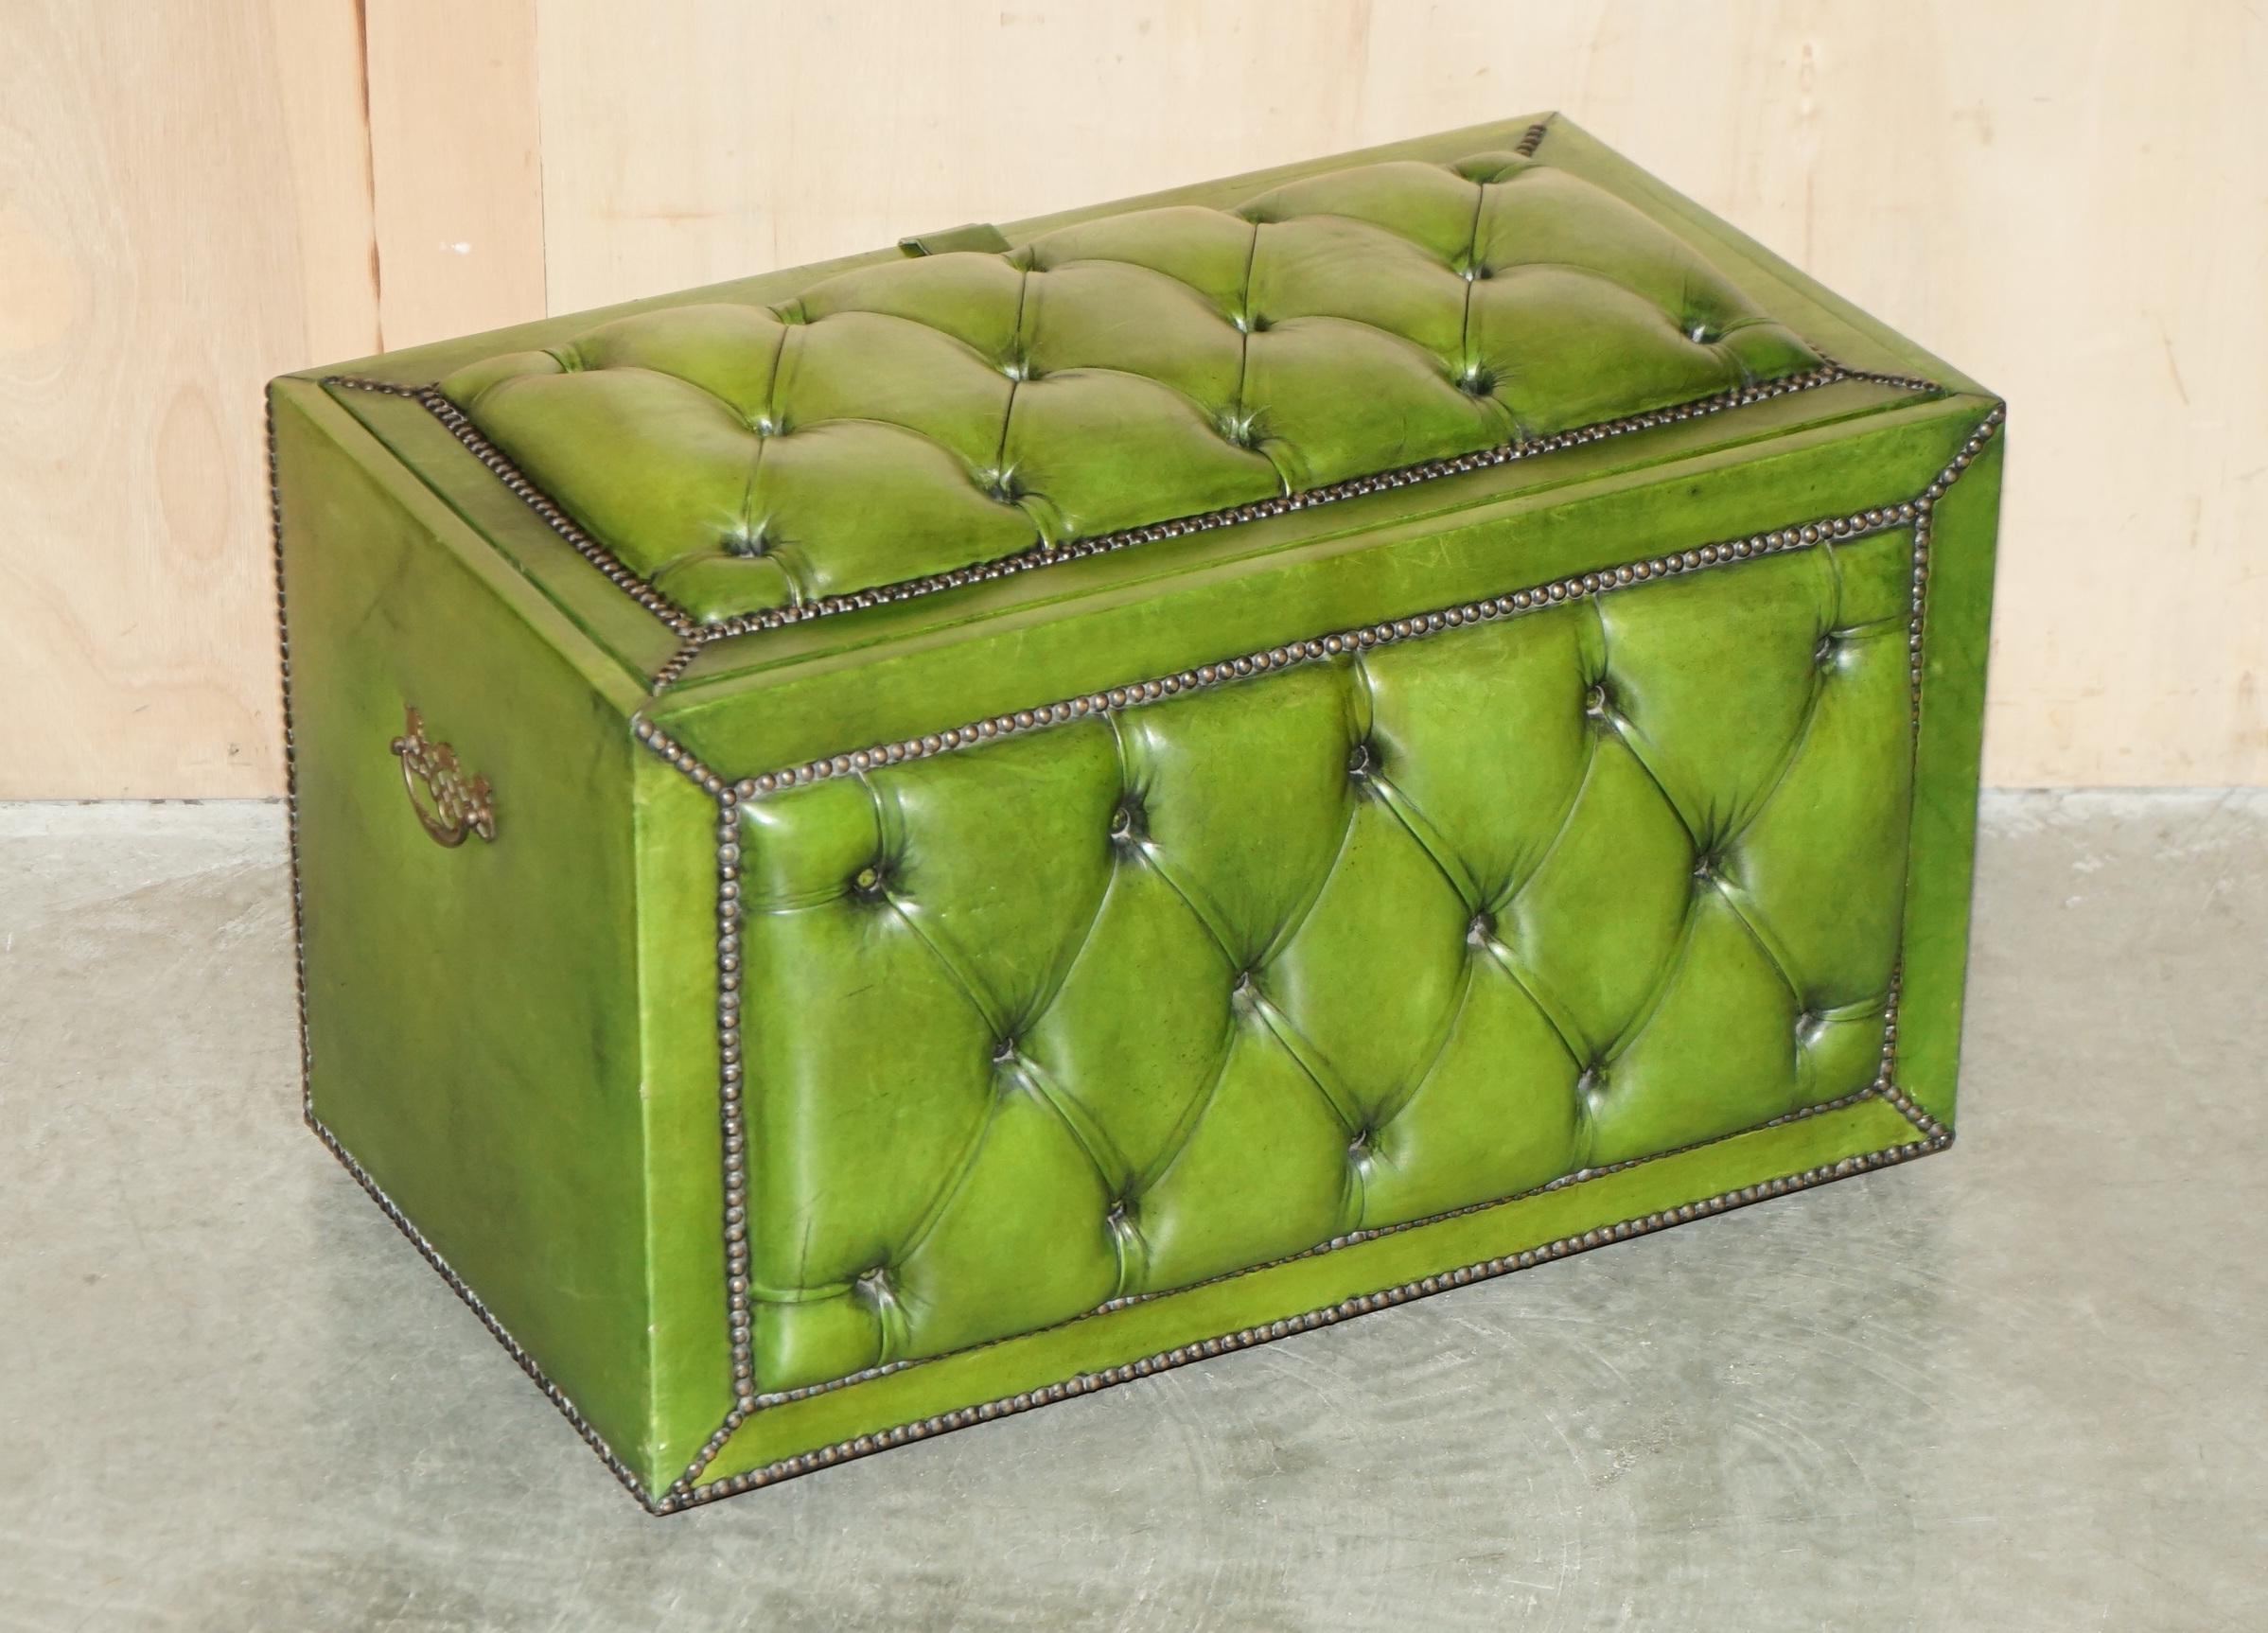 Royal House Antiques

Royal House Antiques is delighted to offer for sale this absolutely exquisite hand made in England circa 1900 Green leather Chesterfield tufted ottoman with internal storage and reversible card games top 

Please note the